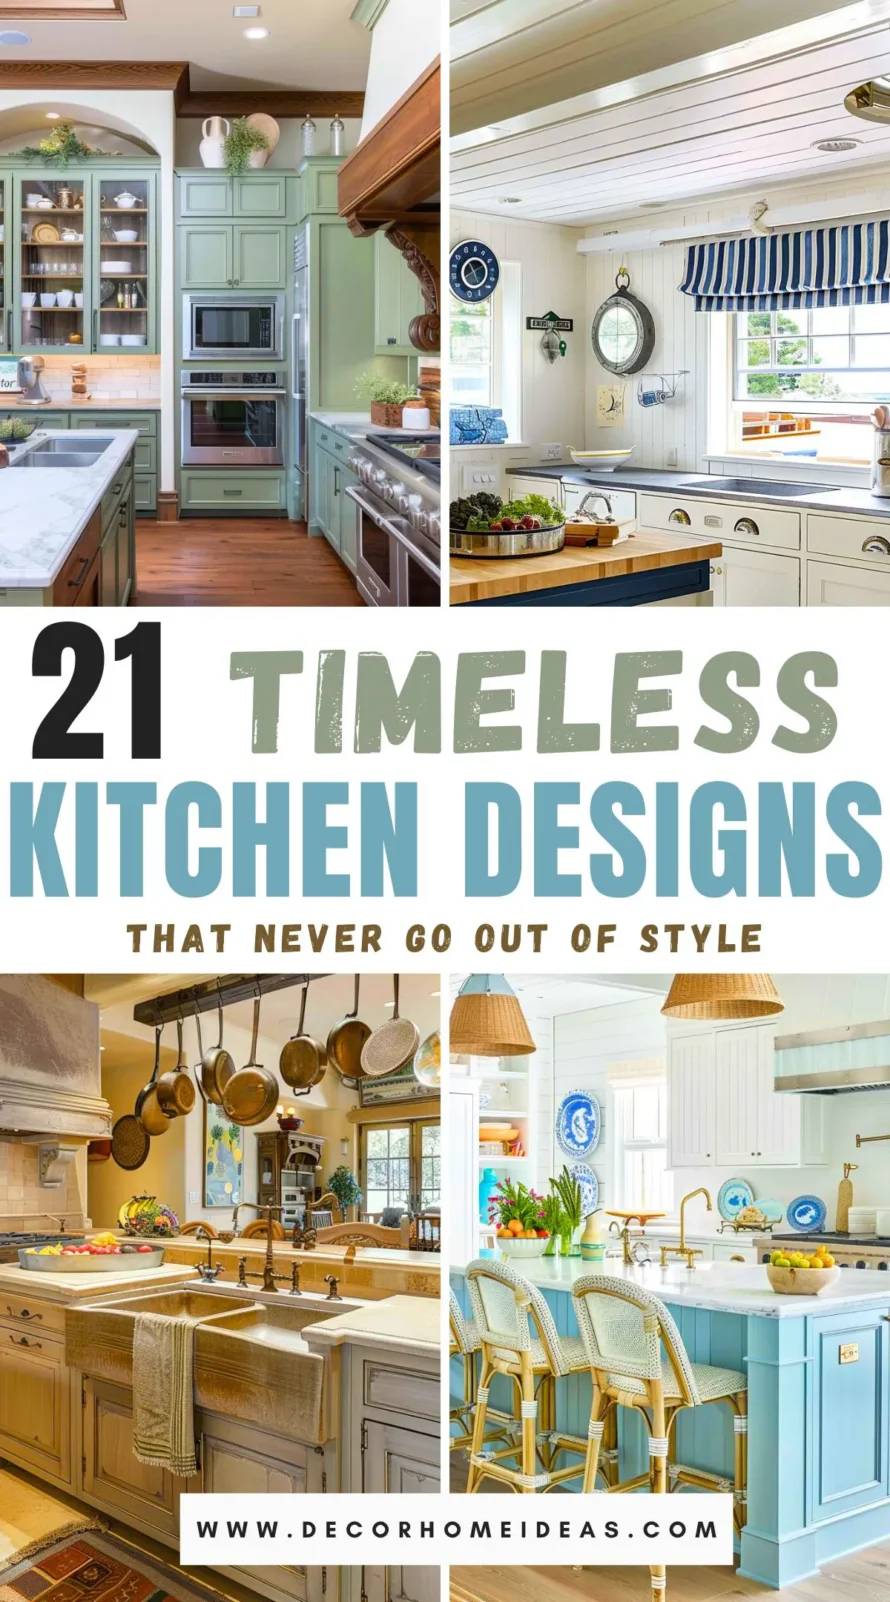 Discover 21 timeless kitchen design ideas that blend functionality with enduring elegance. From classic color palettes to enduring materials and thoughtful layouts, these designs promise to keep your kitchen looking stylish for years to come. Explore the secrets behind creating a kitchen that truly stands the test of time.